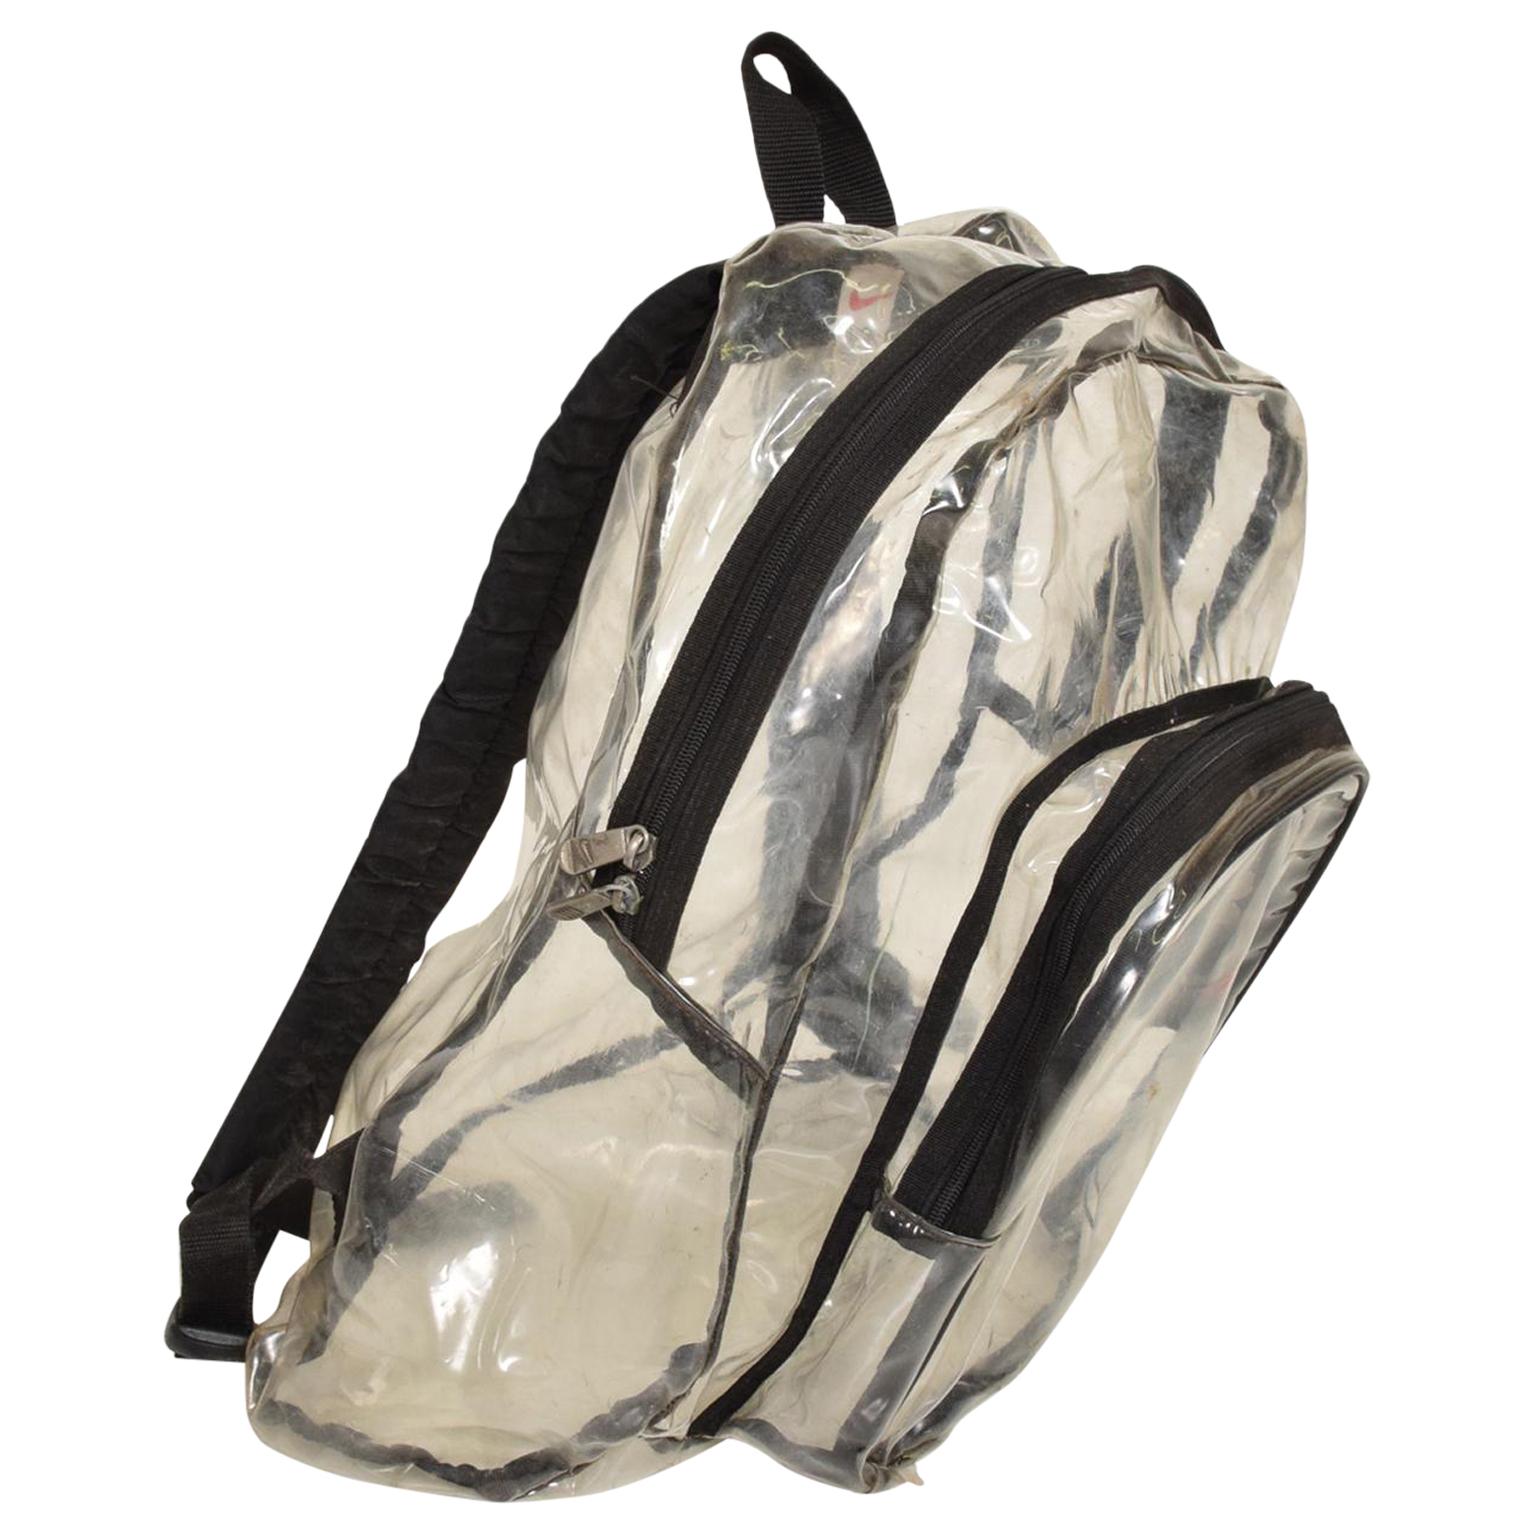 From AMBIANIC
Vintage NIKE Vinyl Backpack Clear See-Through Advertising.
Made in Mexico for Nike 1980s
Dimensions: 17 H x 10 D x 13D
Preowned original unrestored fair vintage condition
See images